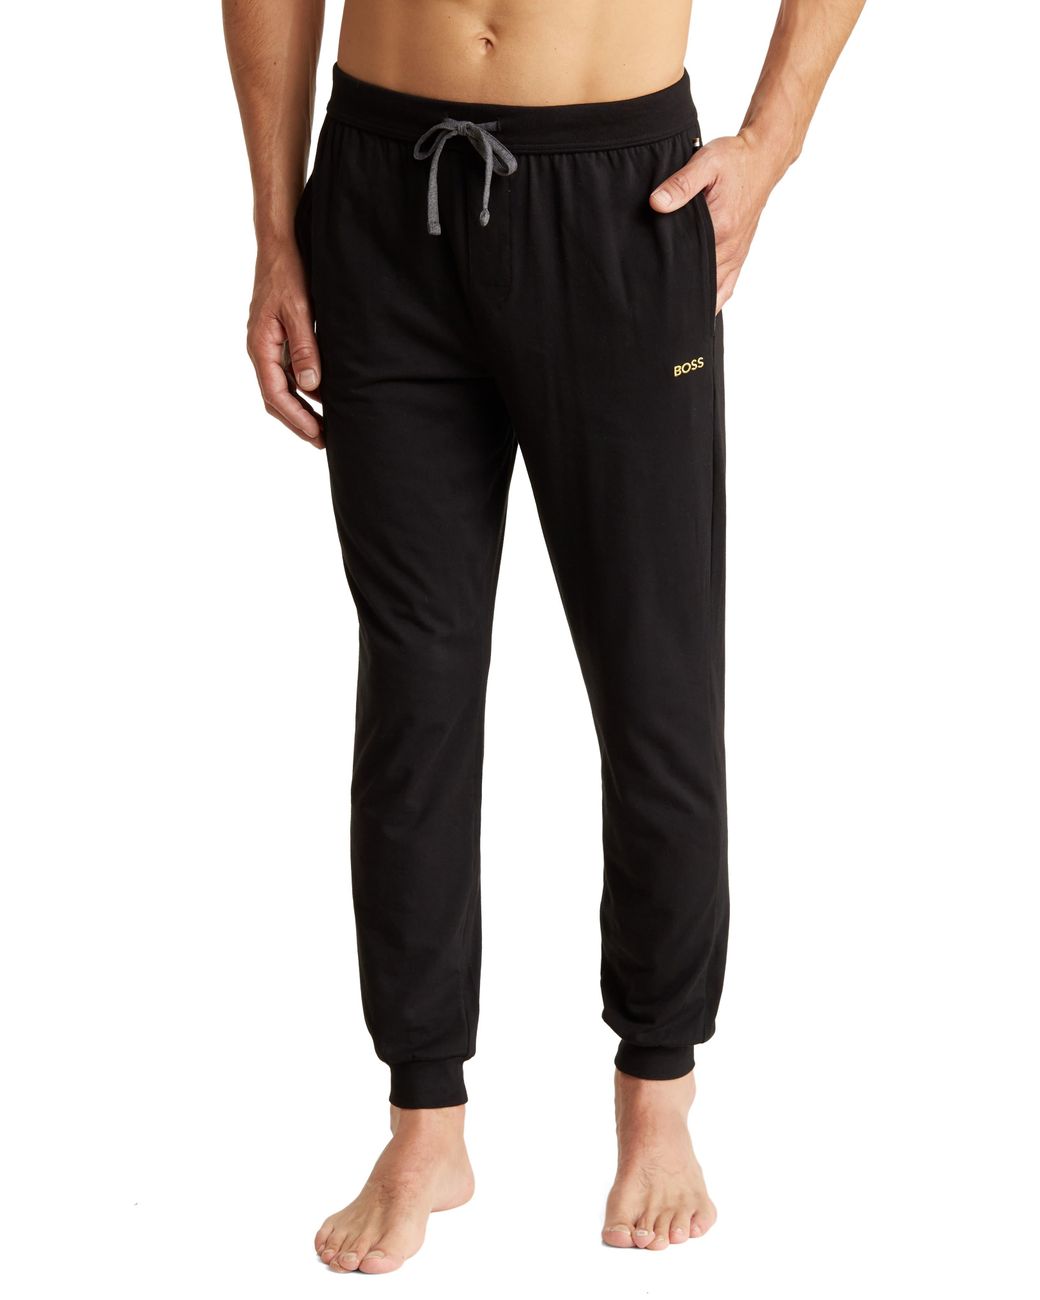 BOSS by BOSS & Match Pajama Joggers in Black for Men Lyst